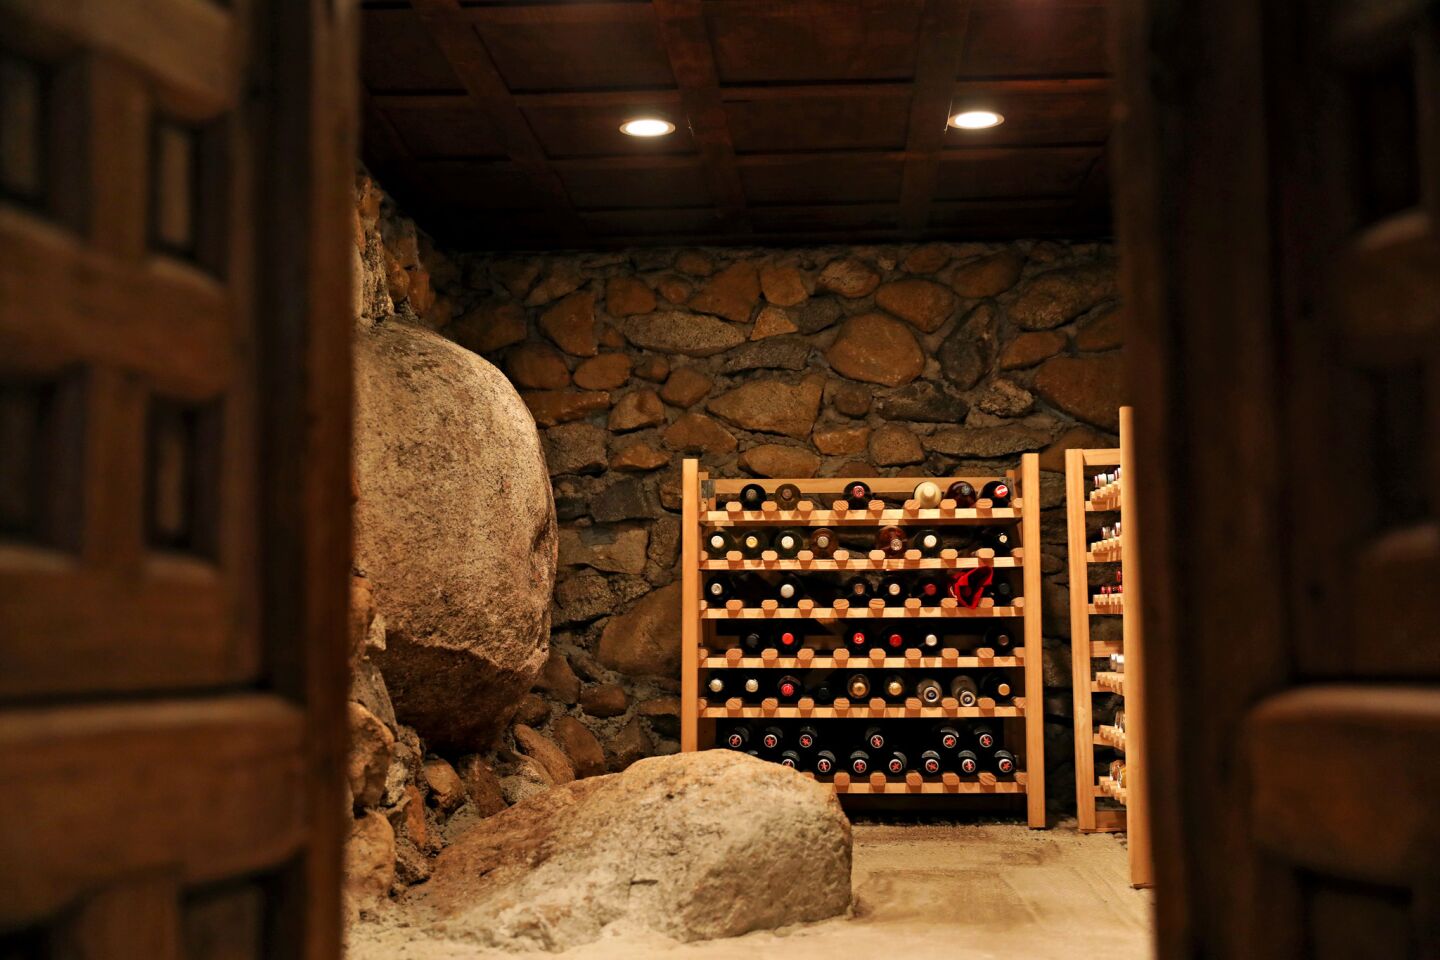 The basement doubles as a wine cellar.